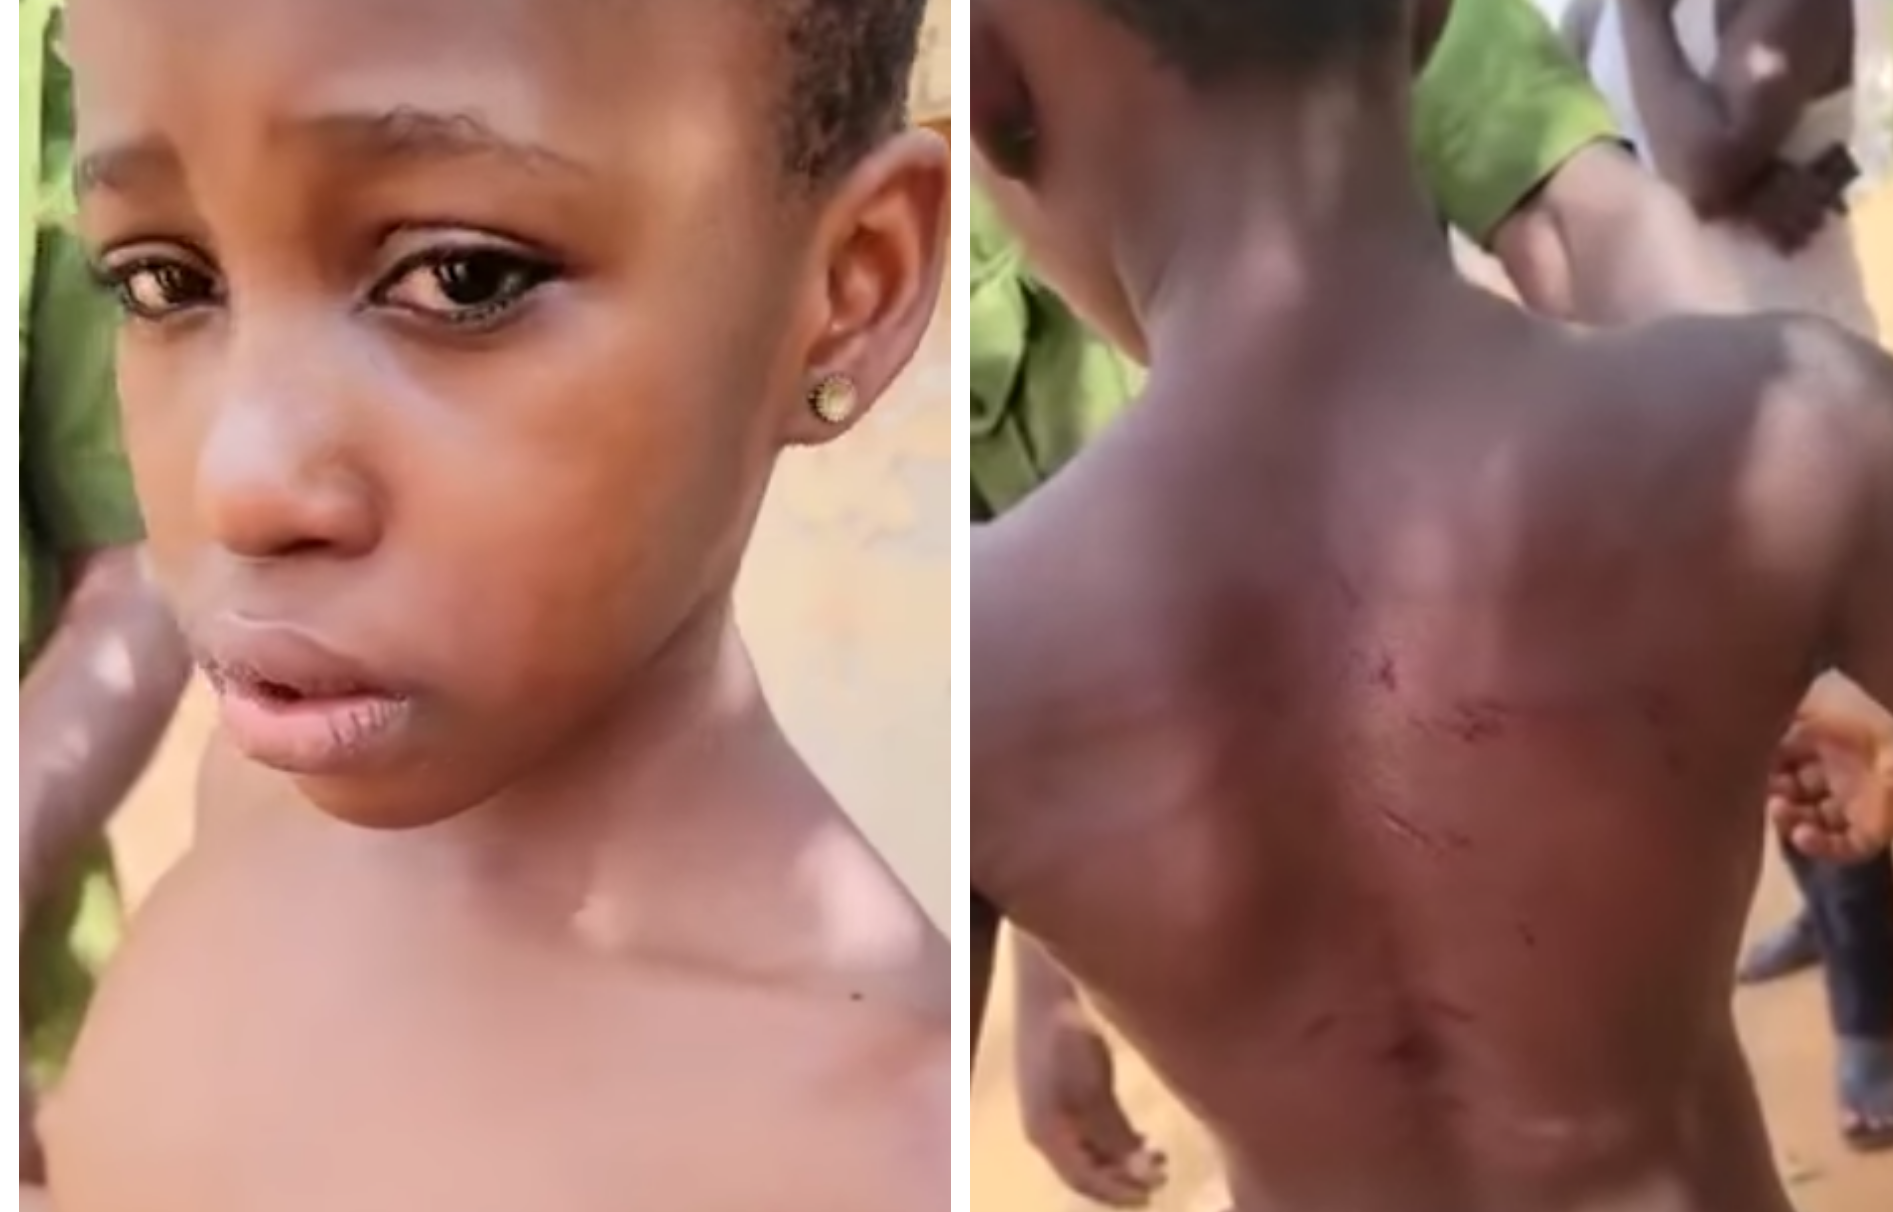 POLICE ARREST MAN FOR ASSAULTING A 10 YEAR OLD MAID FOR BEDWETTING, POLICE ARREST MAN FOR ASSAULTING A 10 YEAR OLD MAID FOR BEDWETTING, INFINITY LOADED